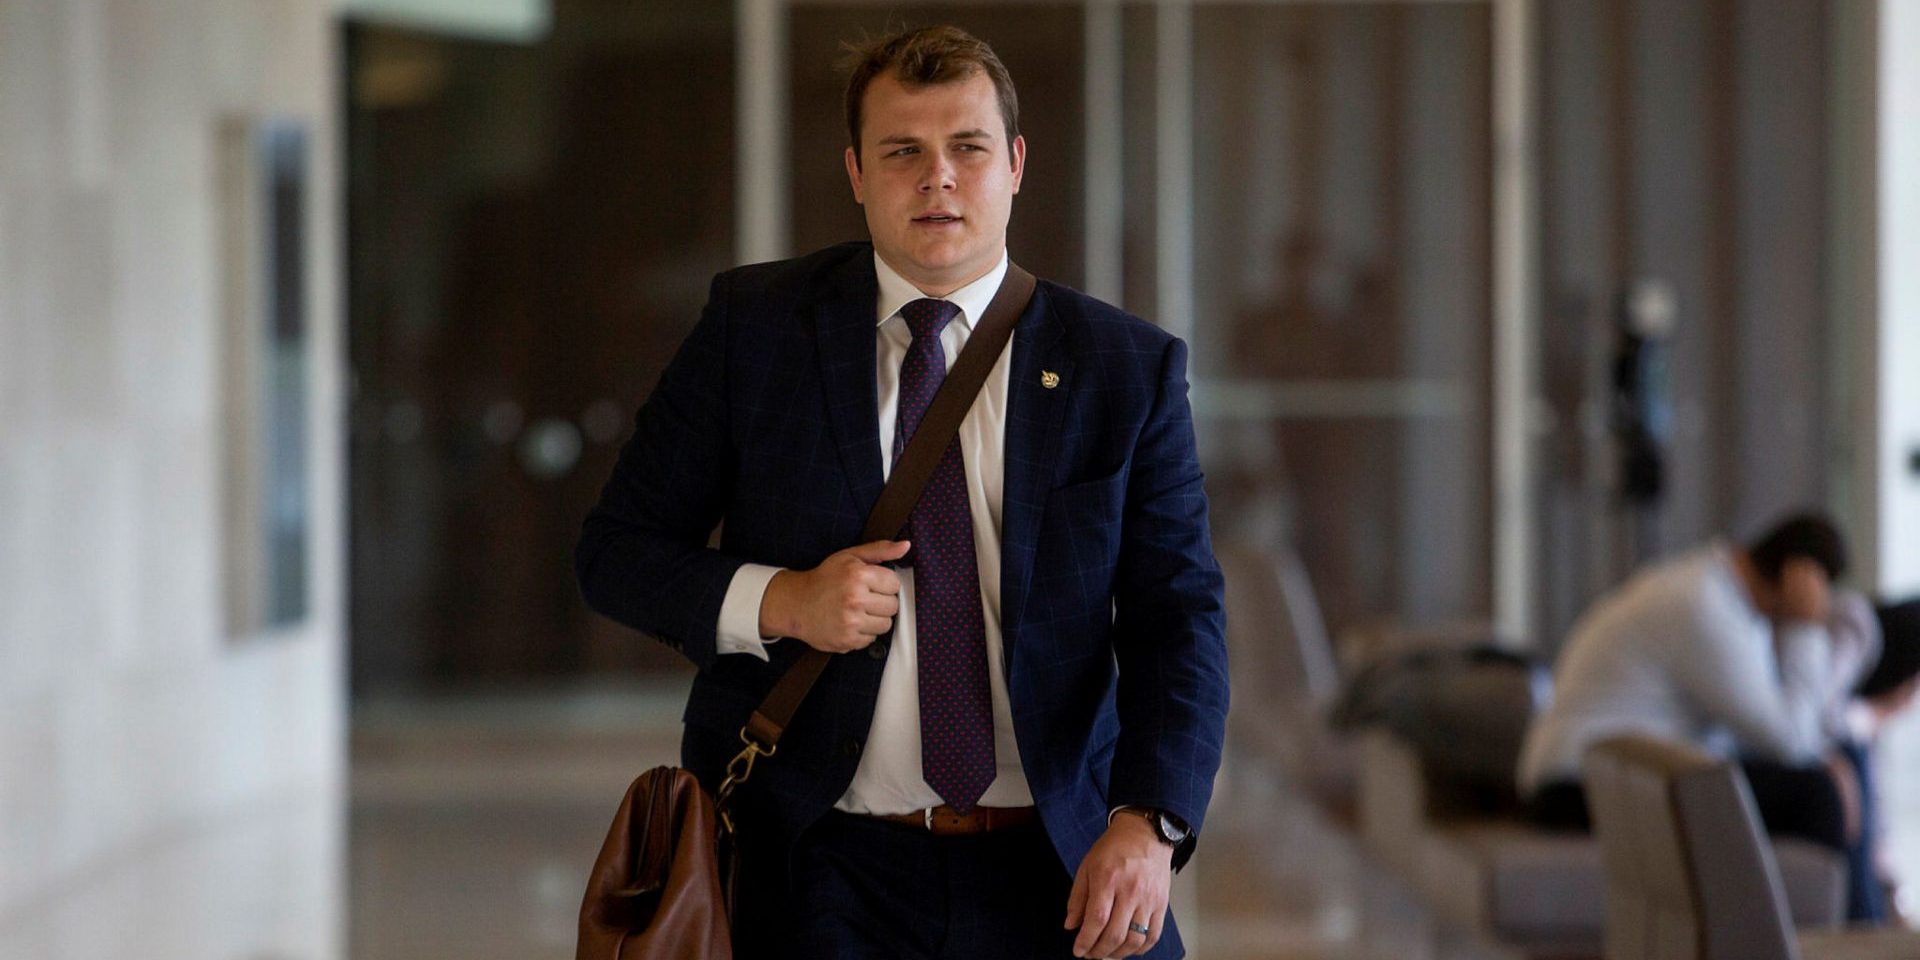 Conservative MP Dane Lloyd arrives for an emergency meeting of the Standing Committee on Access to Information, Privacy and Ethics in Wellington Building on July 23, 2020. Andrew Meade